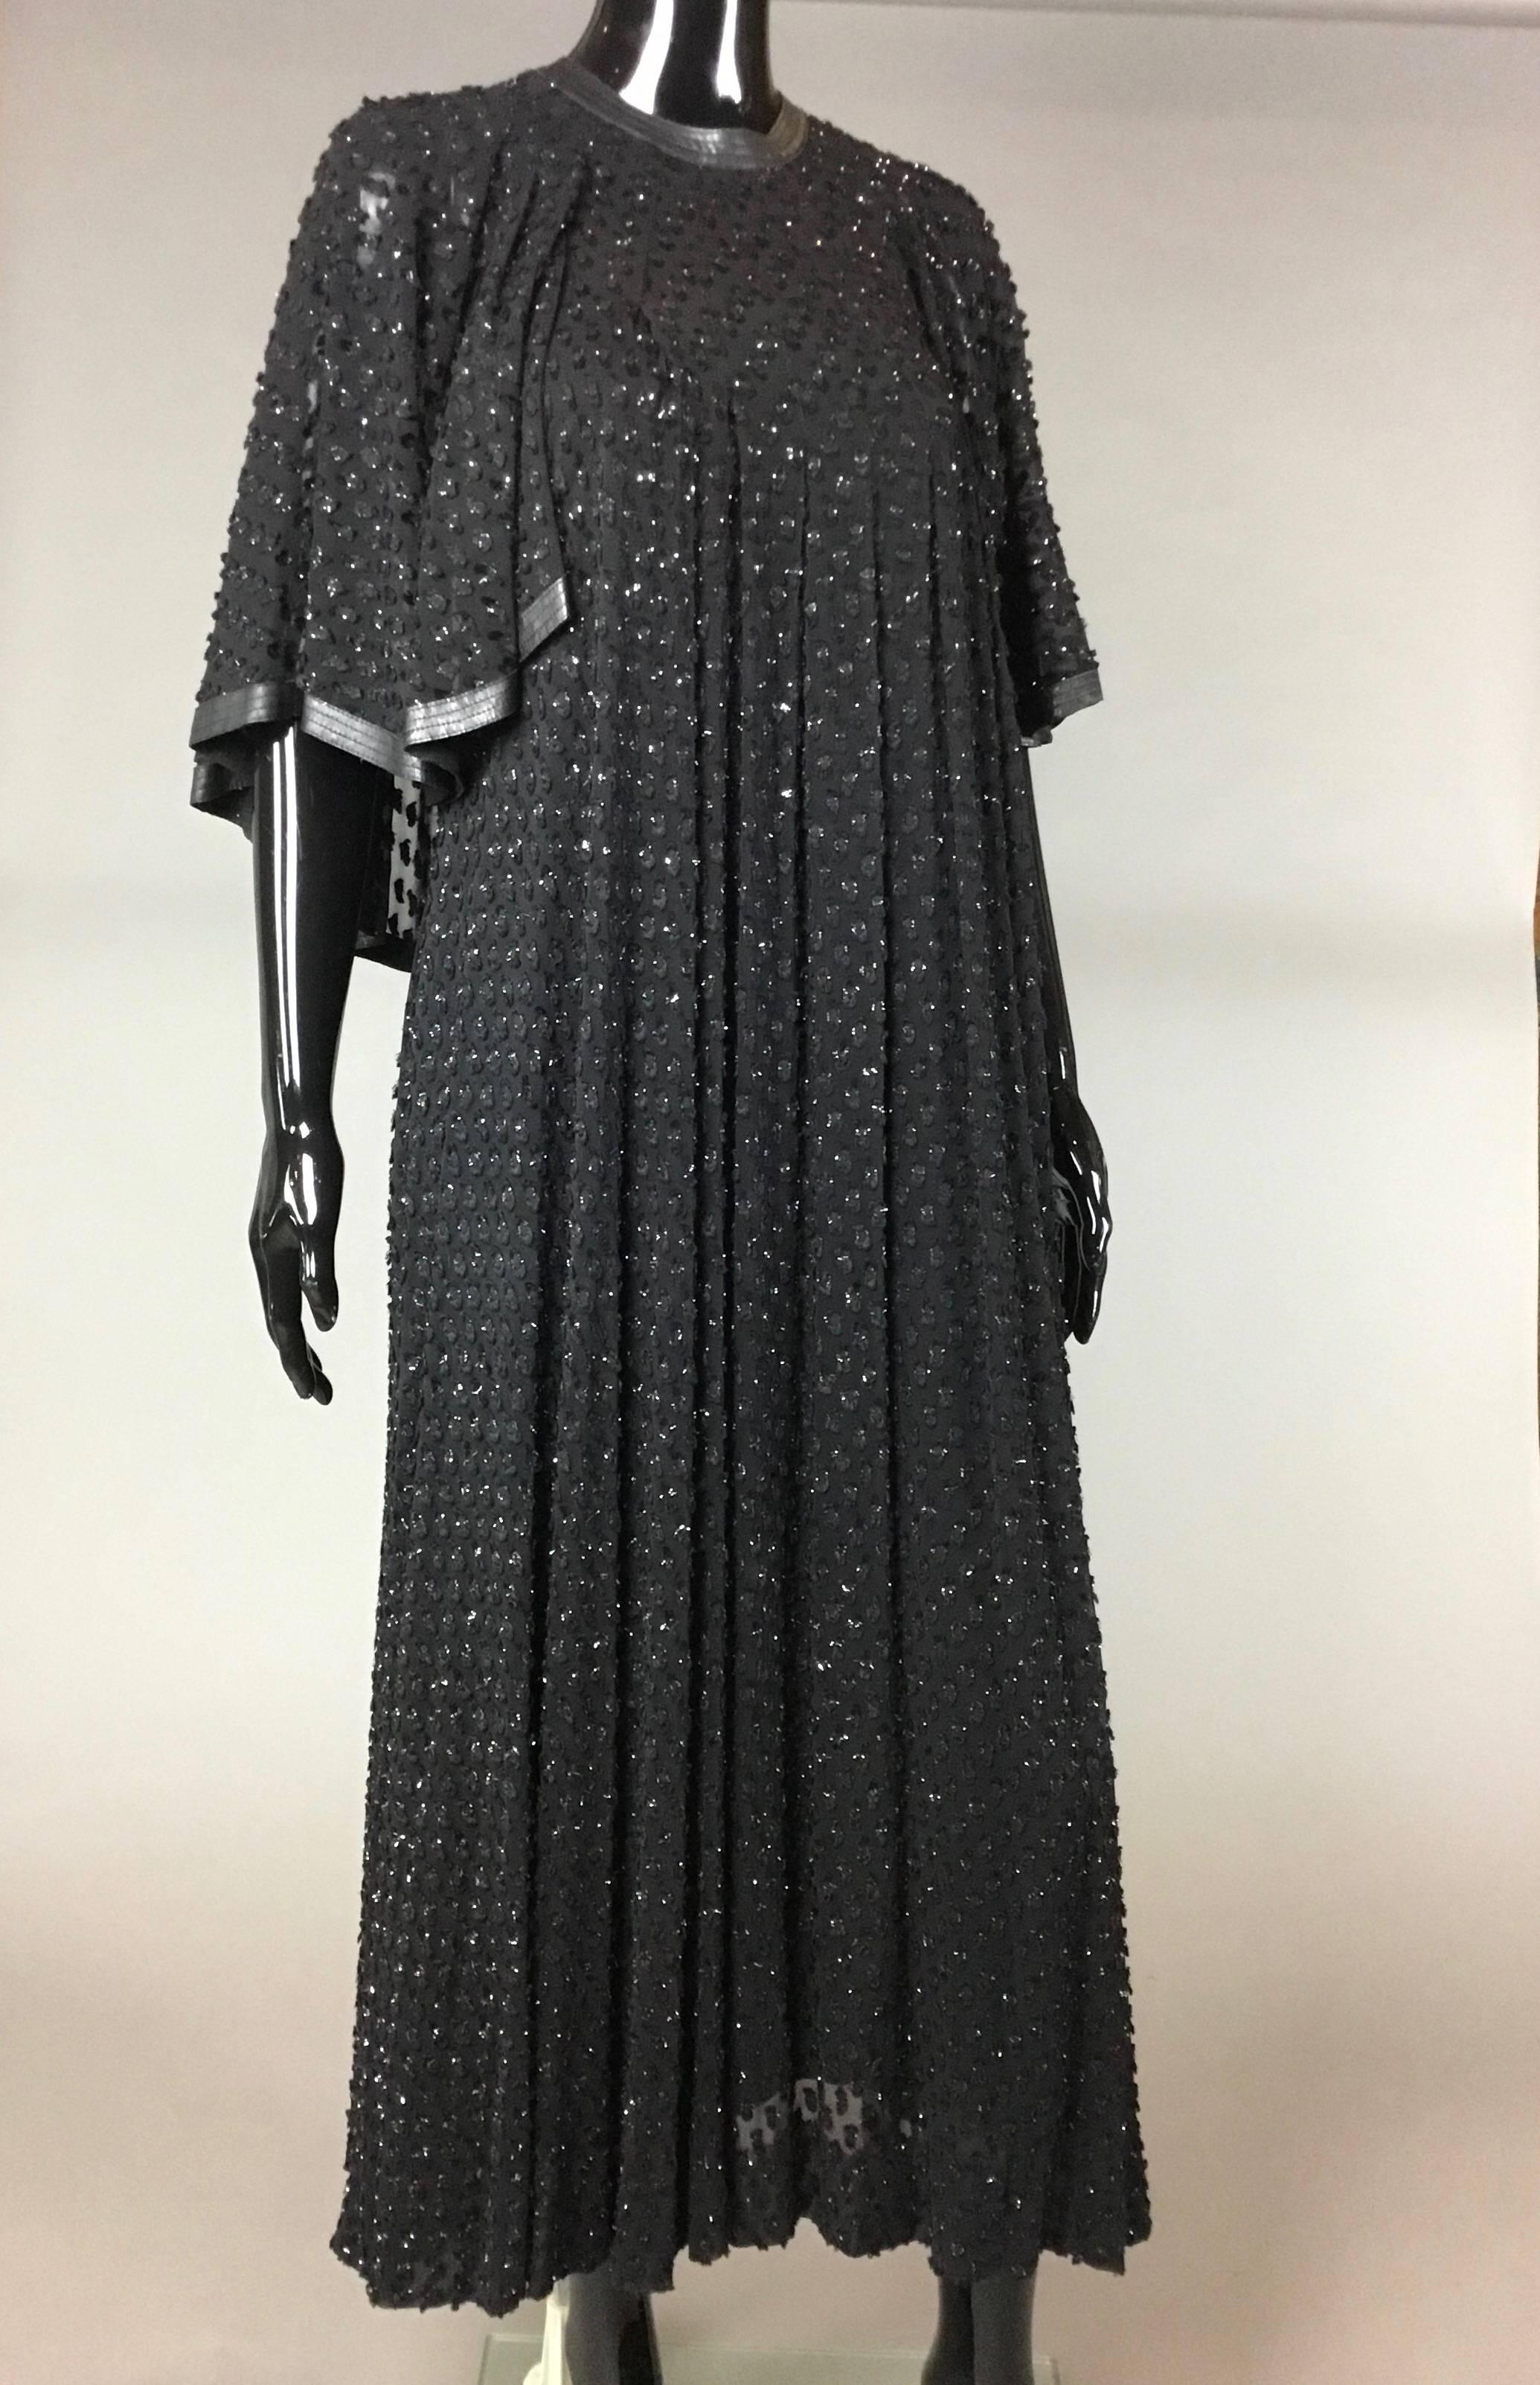 A beautiful long Jean Muir devoré dress. The fabric has raised velvet with just a hint of sparkle. it is high necked with a fine band of leather as trim. A thirties style integral cape looks like sleeves at front and drapes lower at back, with the